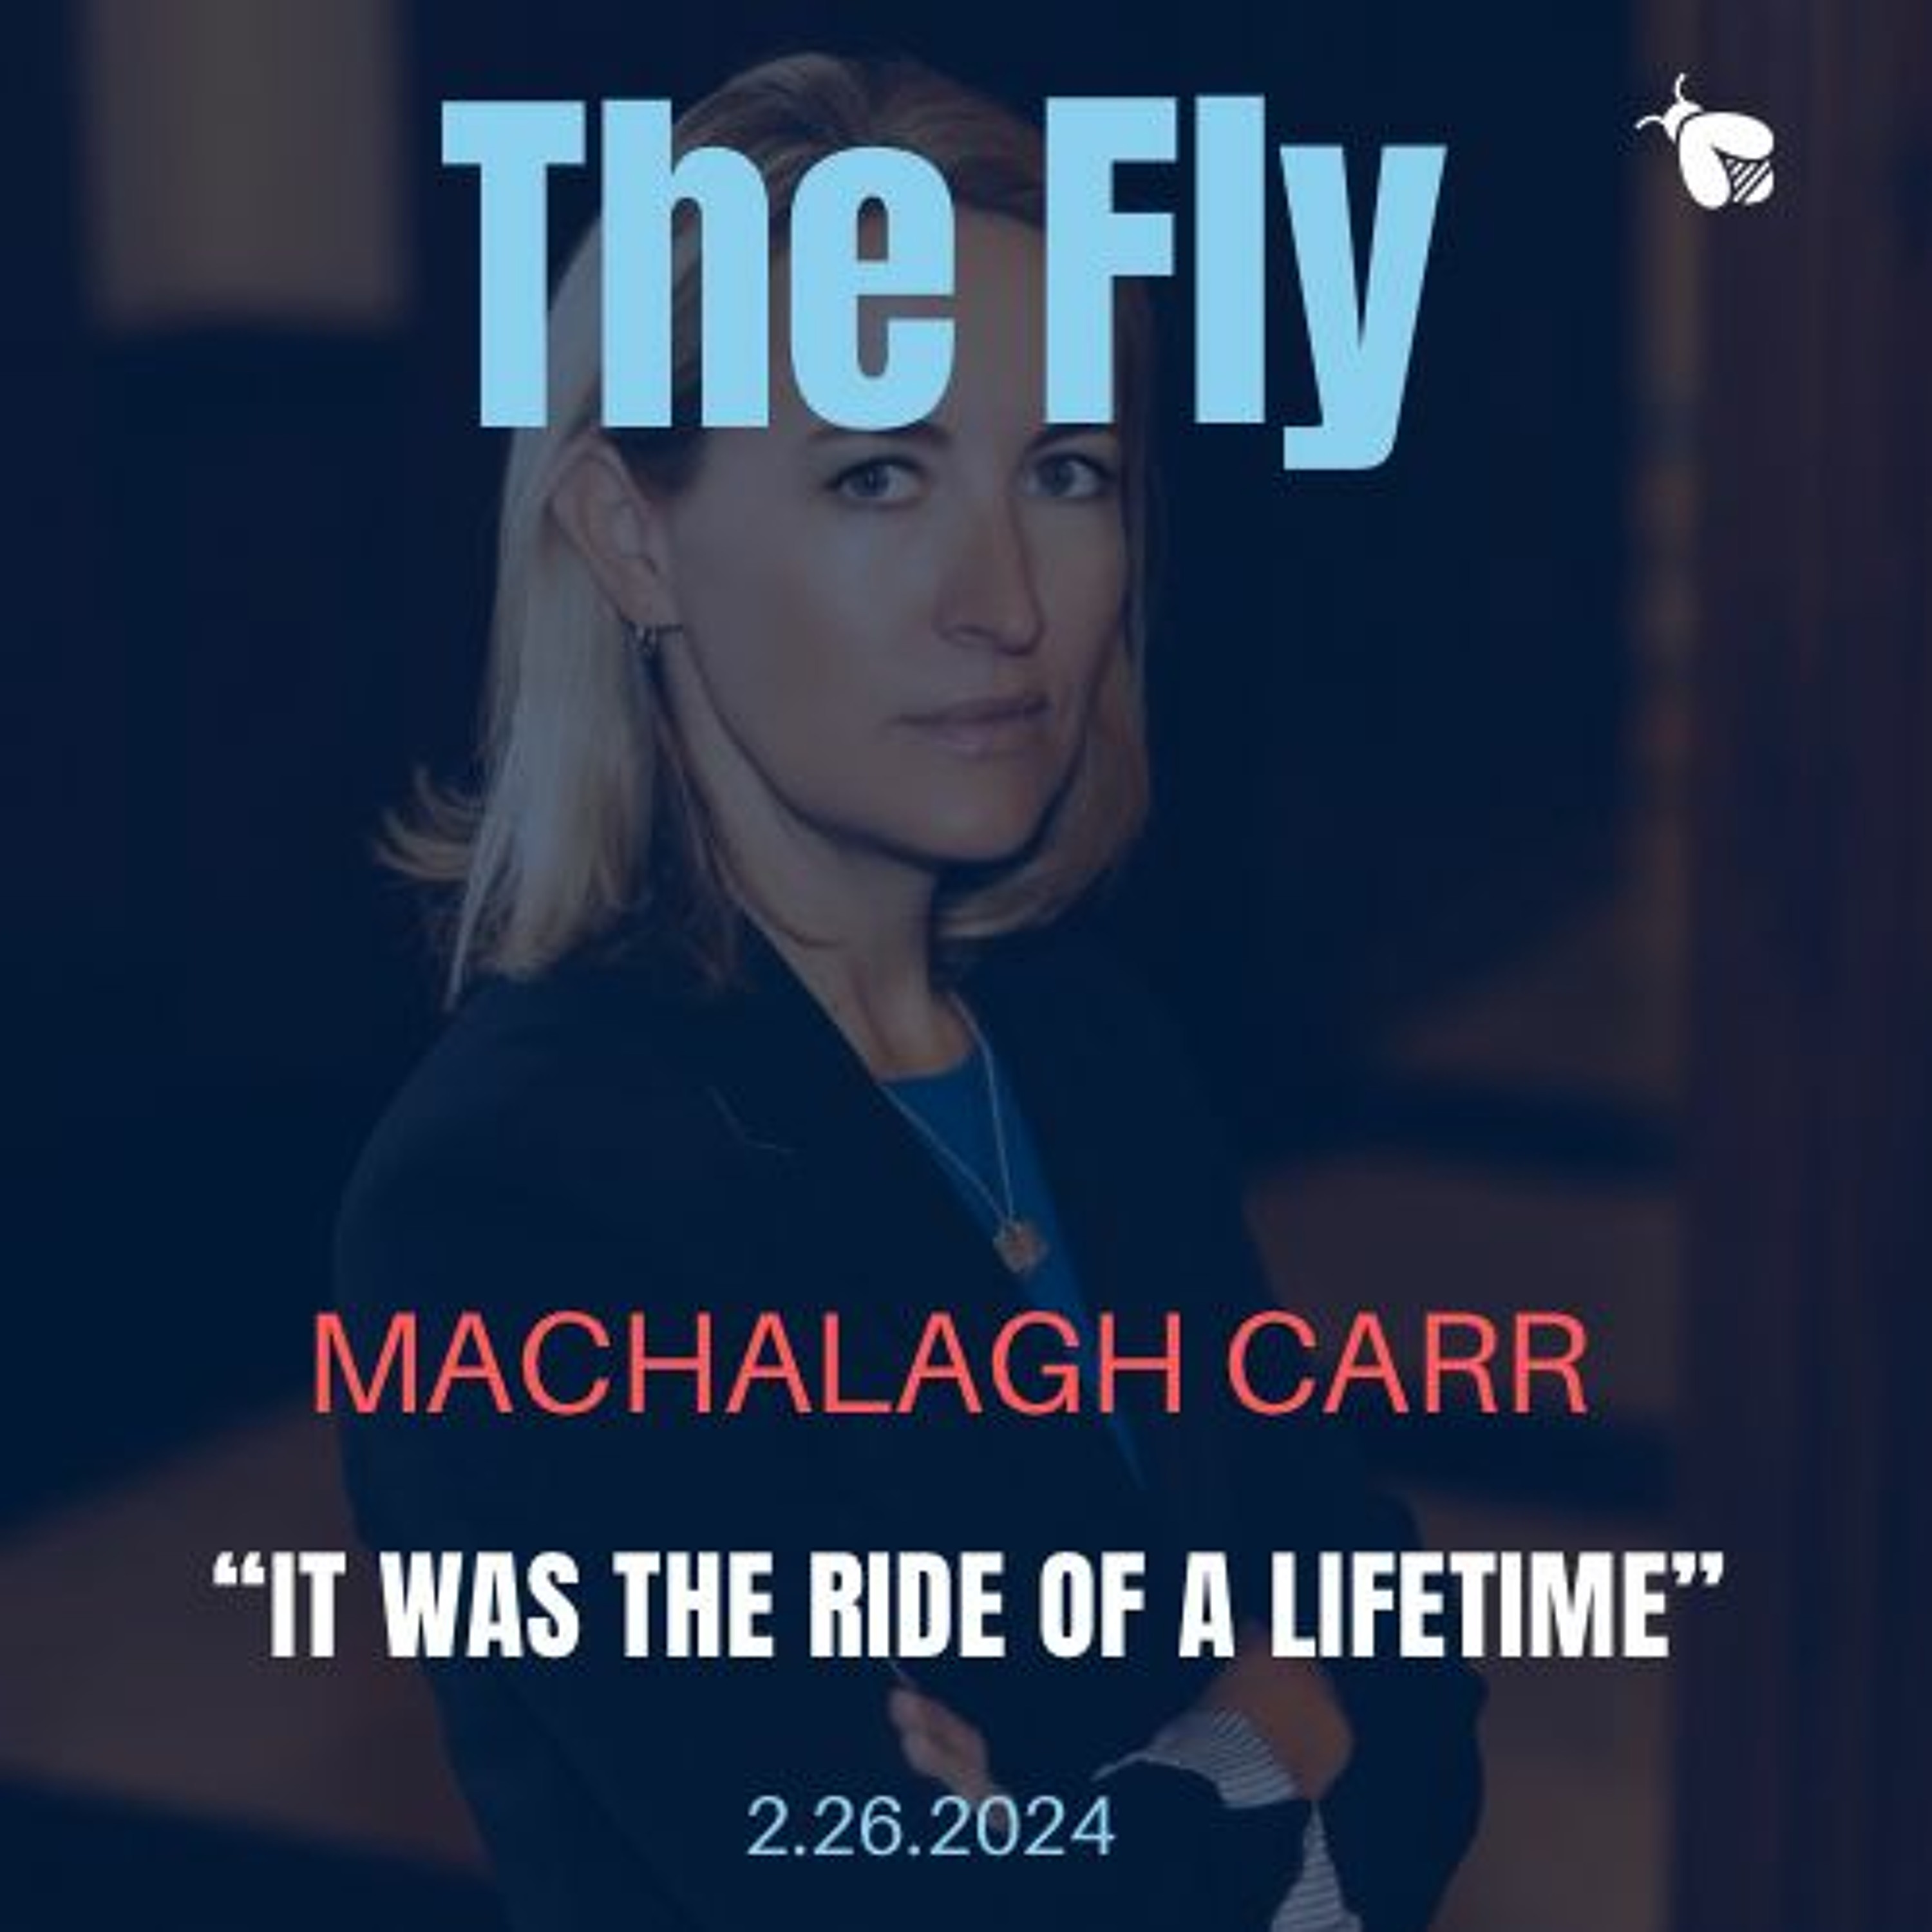 Machalagh Carr, Speaker McCarthy's Chief of Staff: "It was the ride of a lifetime"